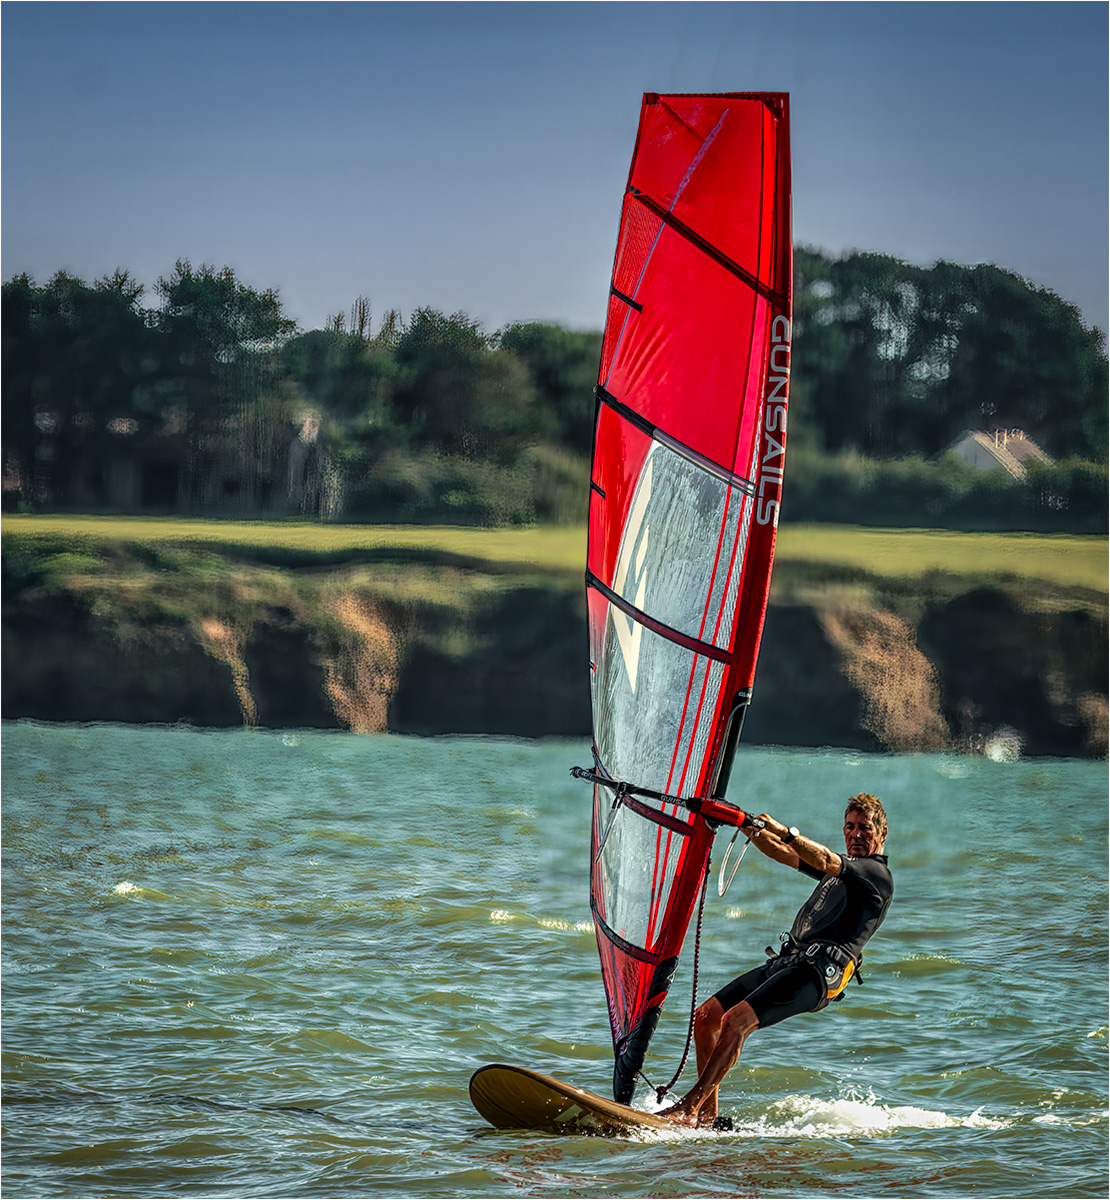 BRITTANY WINDSURFING by Mark Taylor